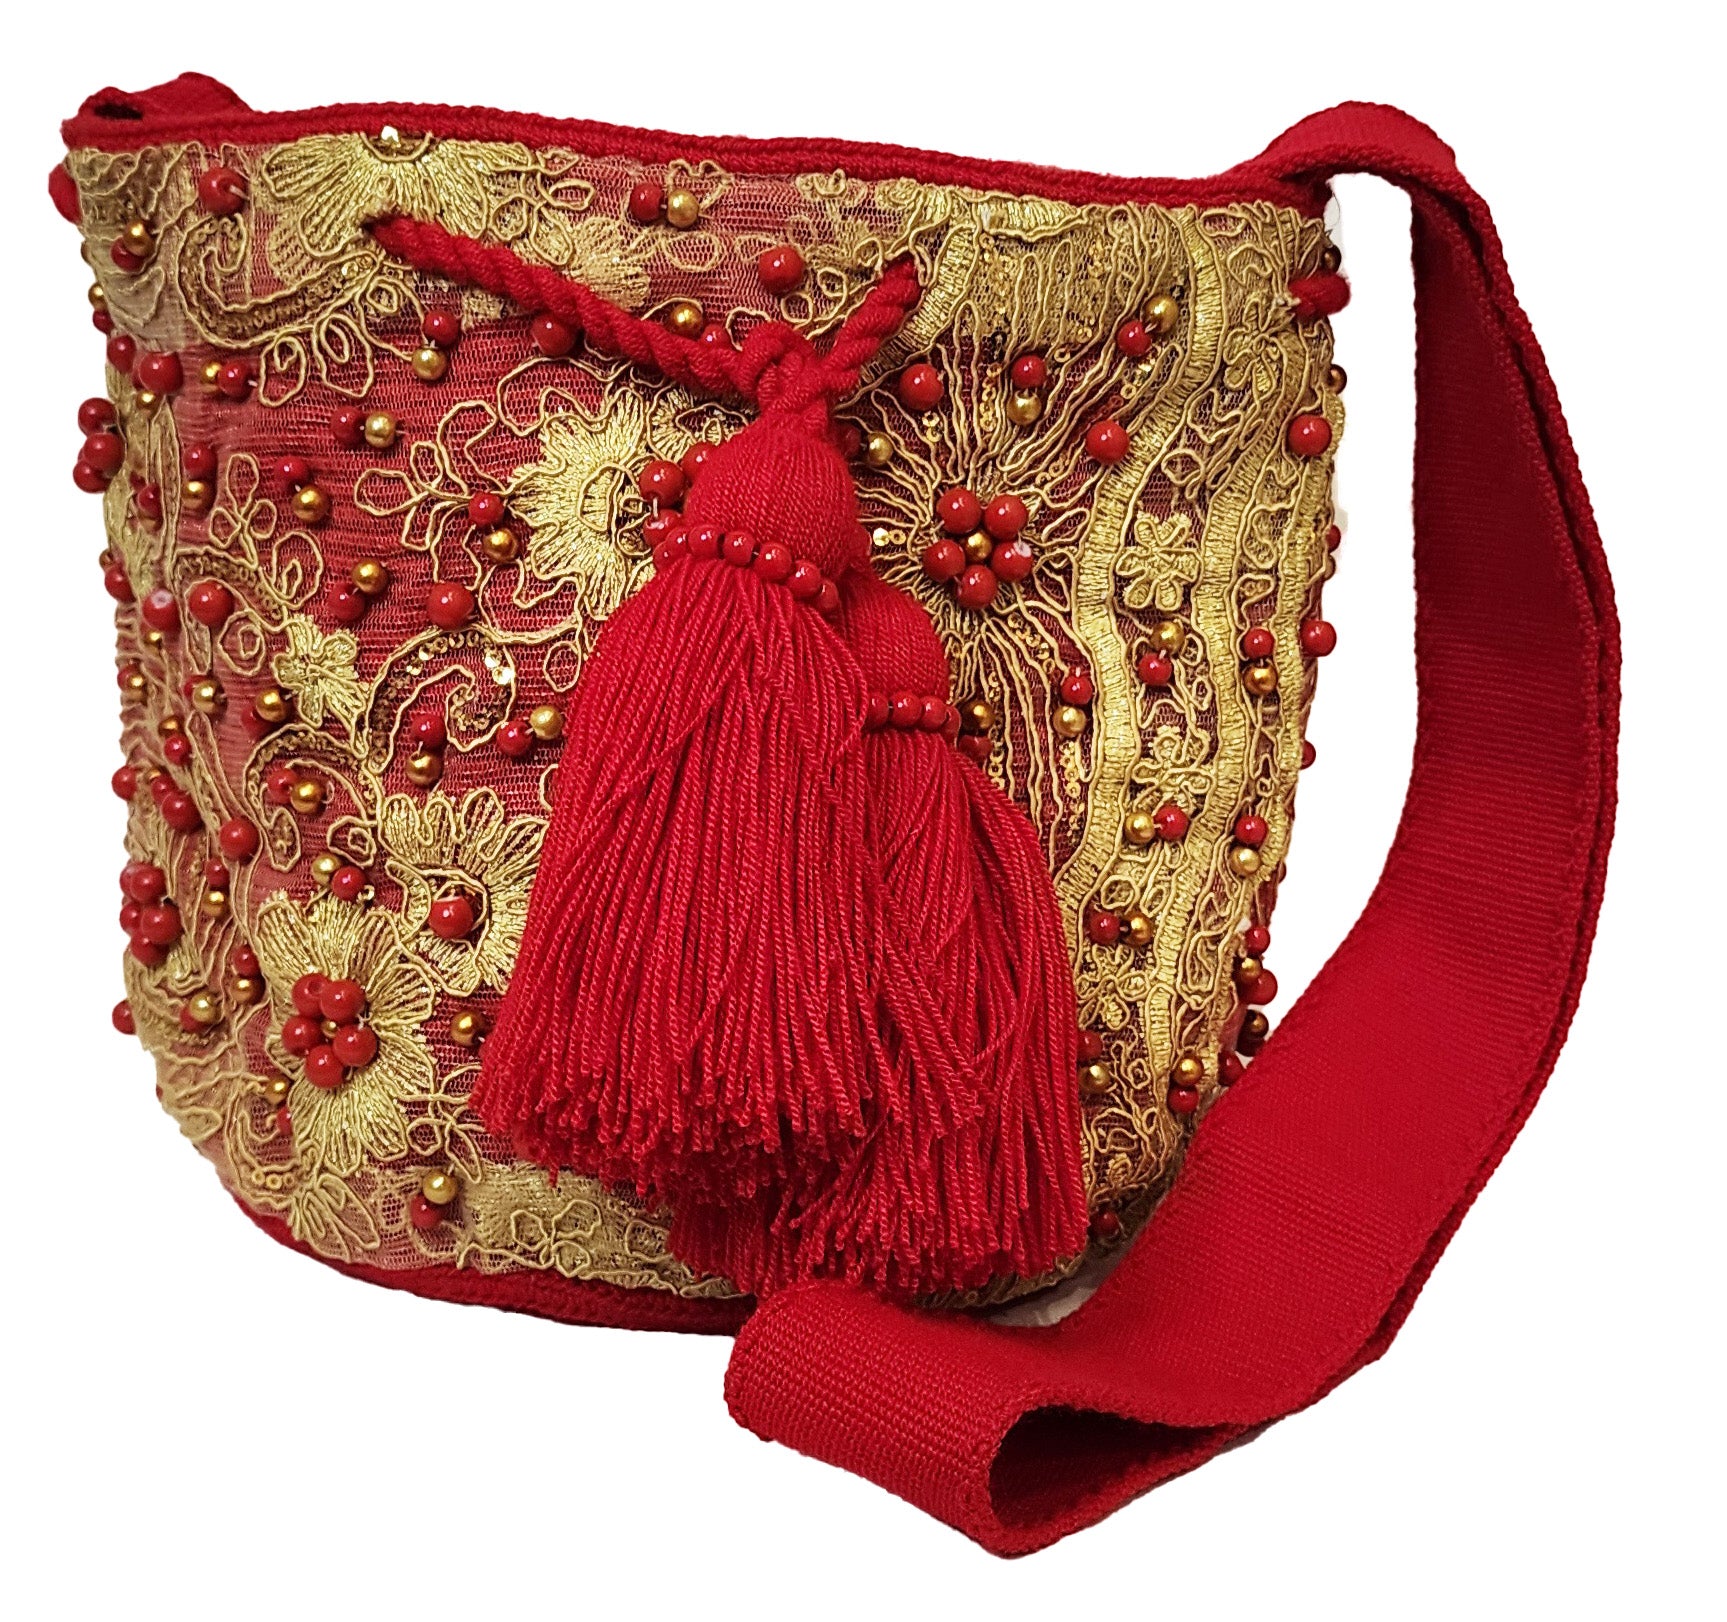 anabella medium crochet crossbody with crystals, lace, and pearls front